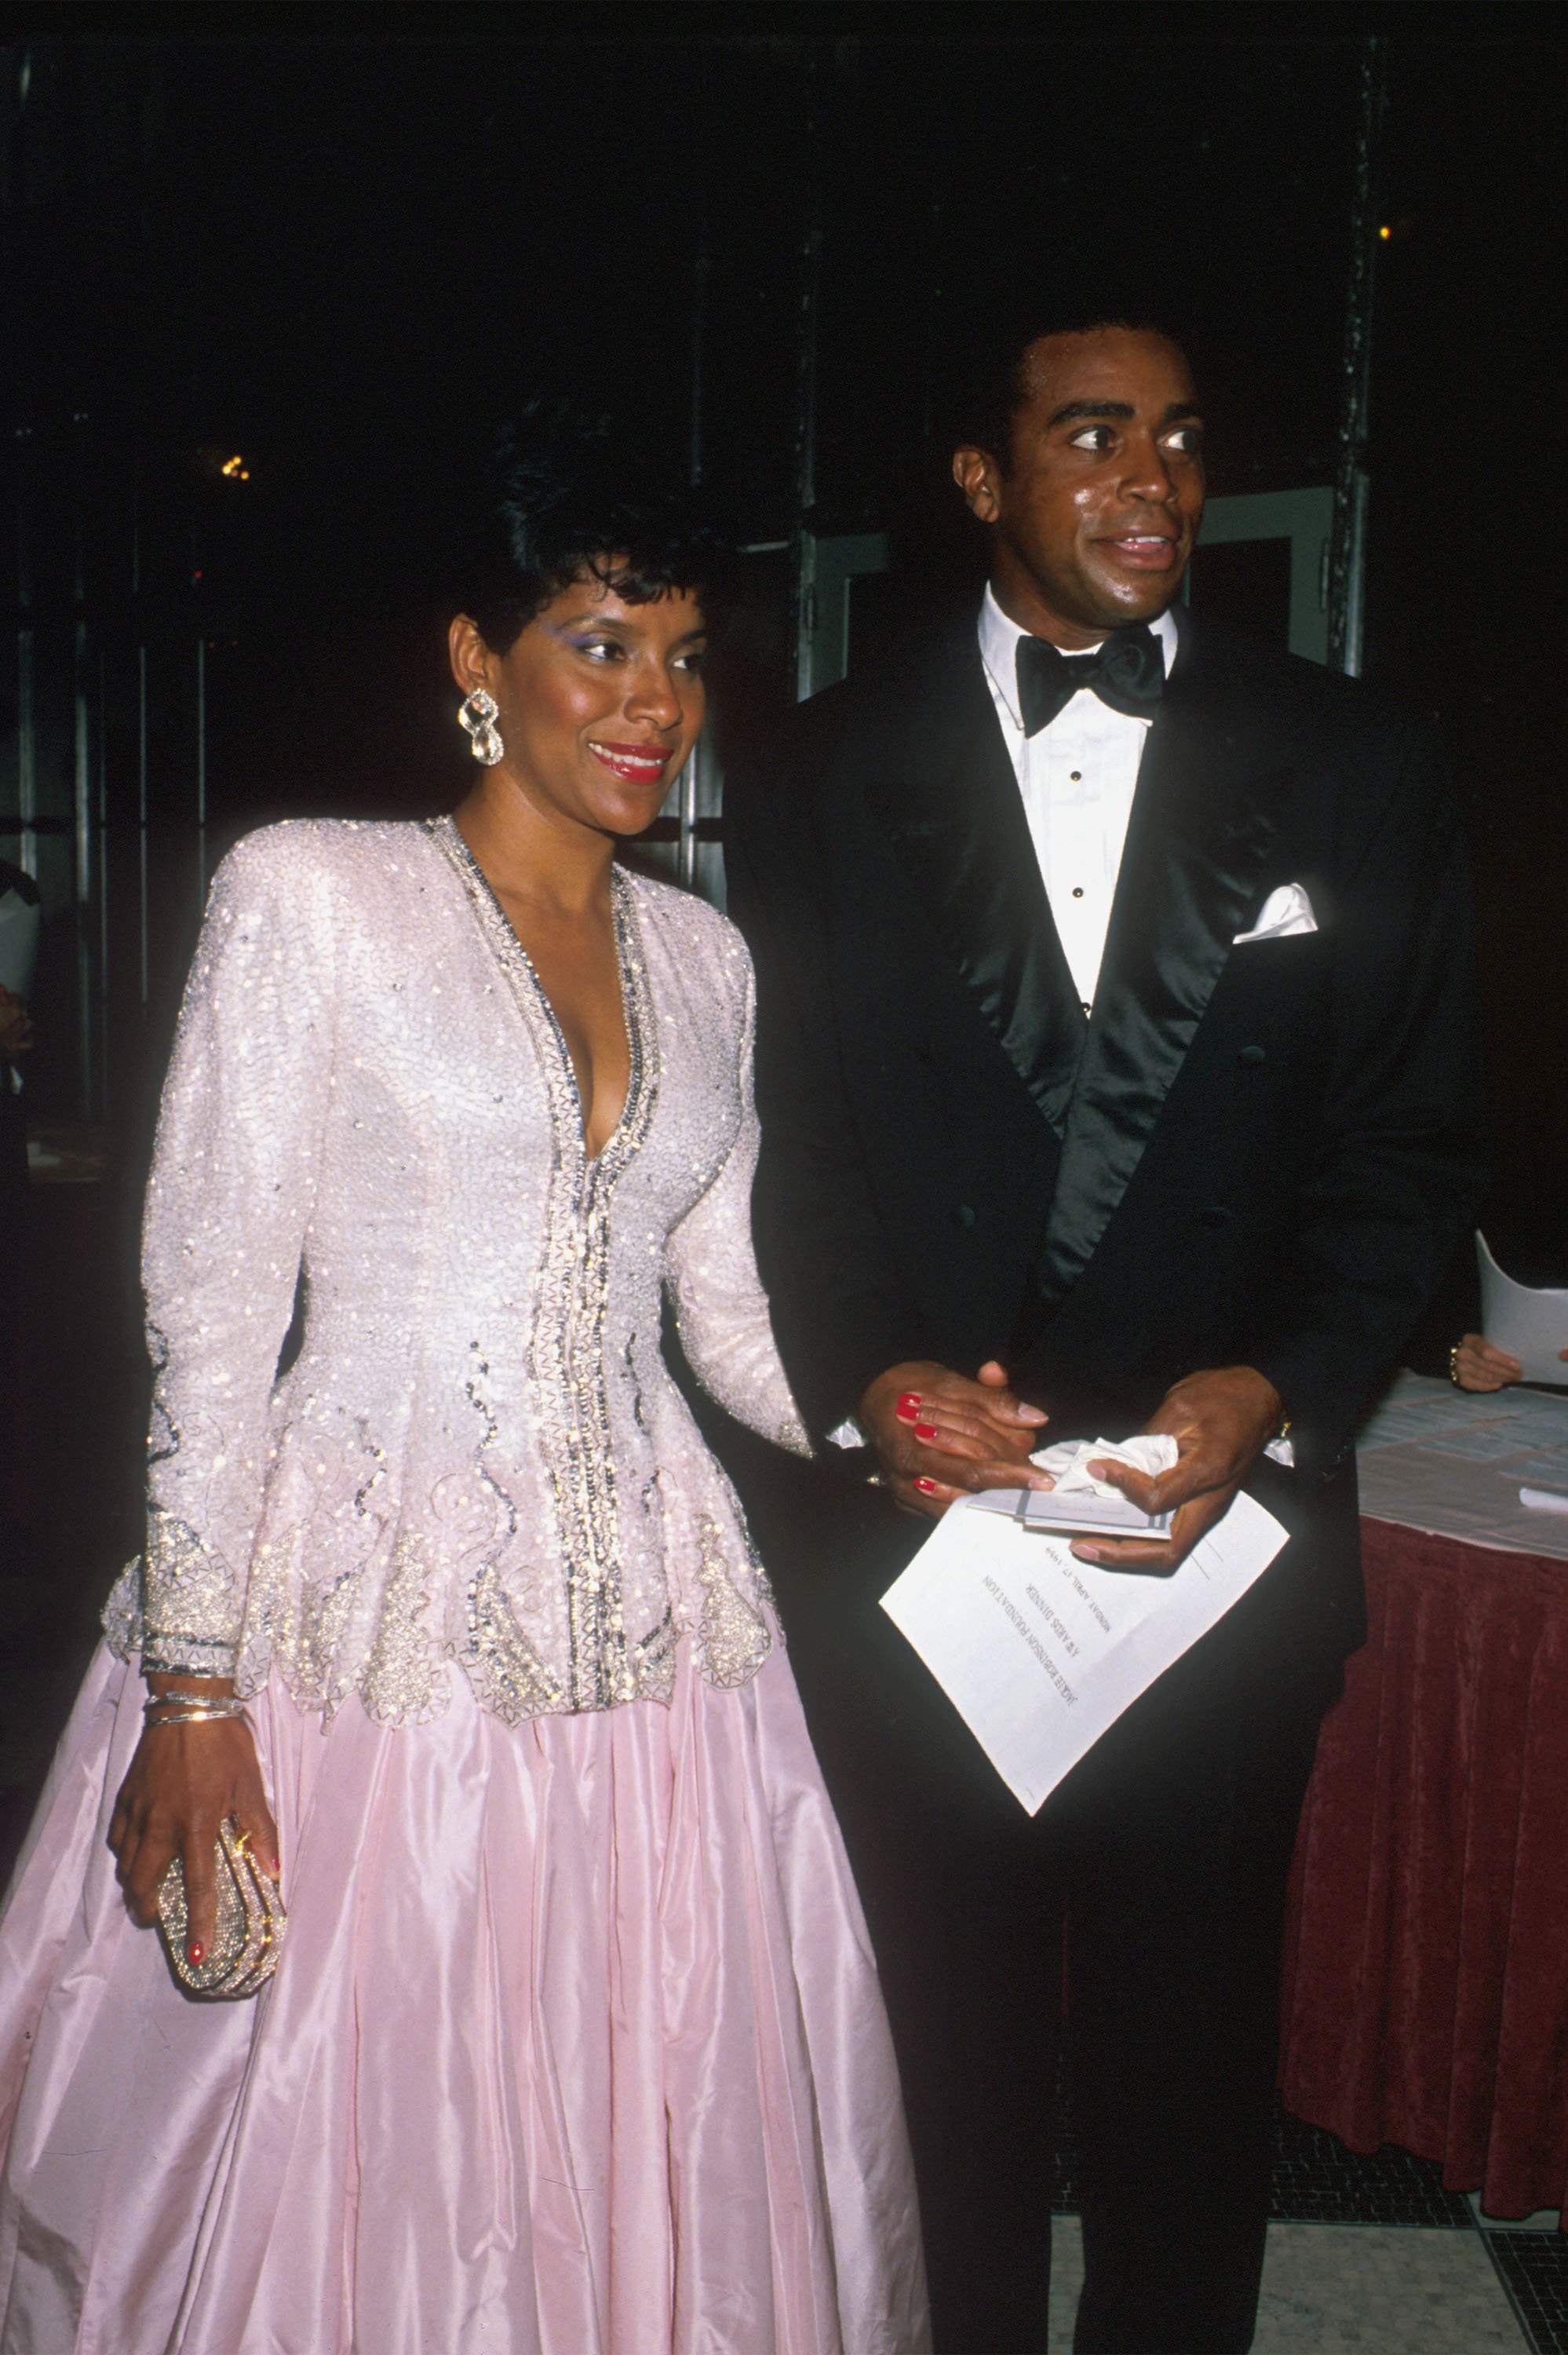 Phylicia Rashad and husband/sportscaster Ahmad Rashad arrive at an event in New York City, April 15, 1989 | Photo: GettyImages